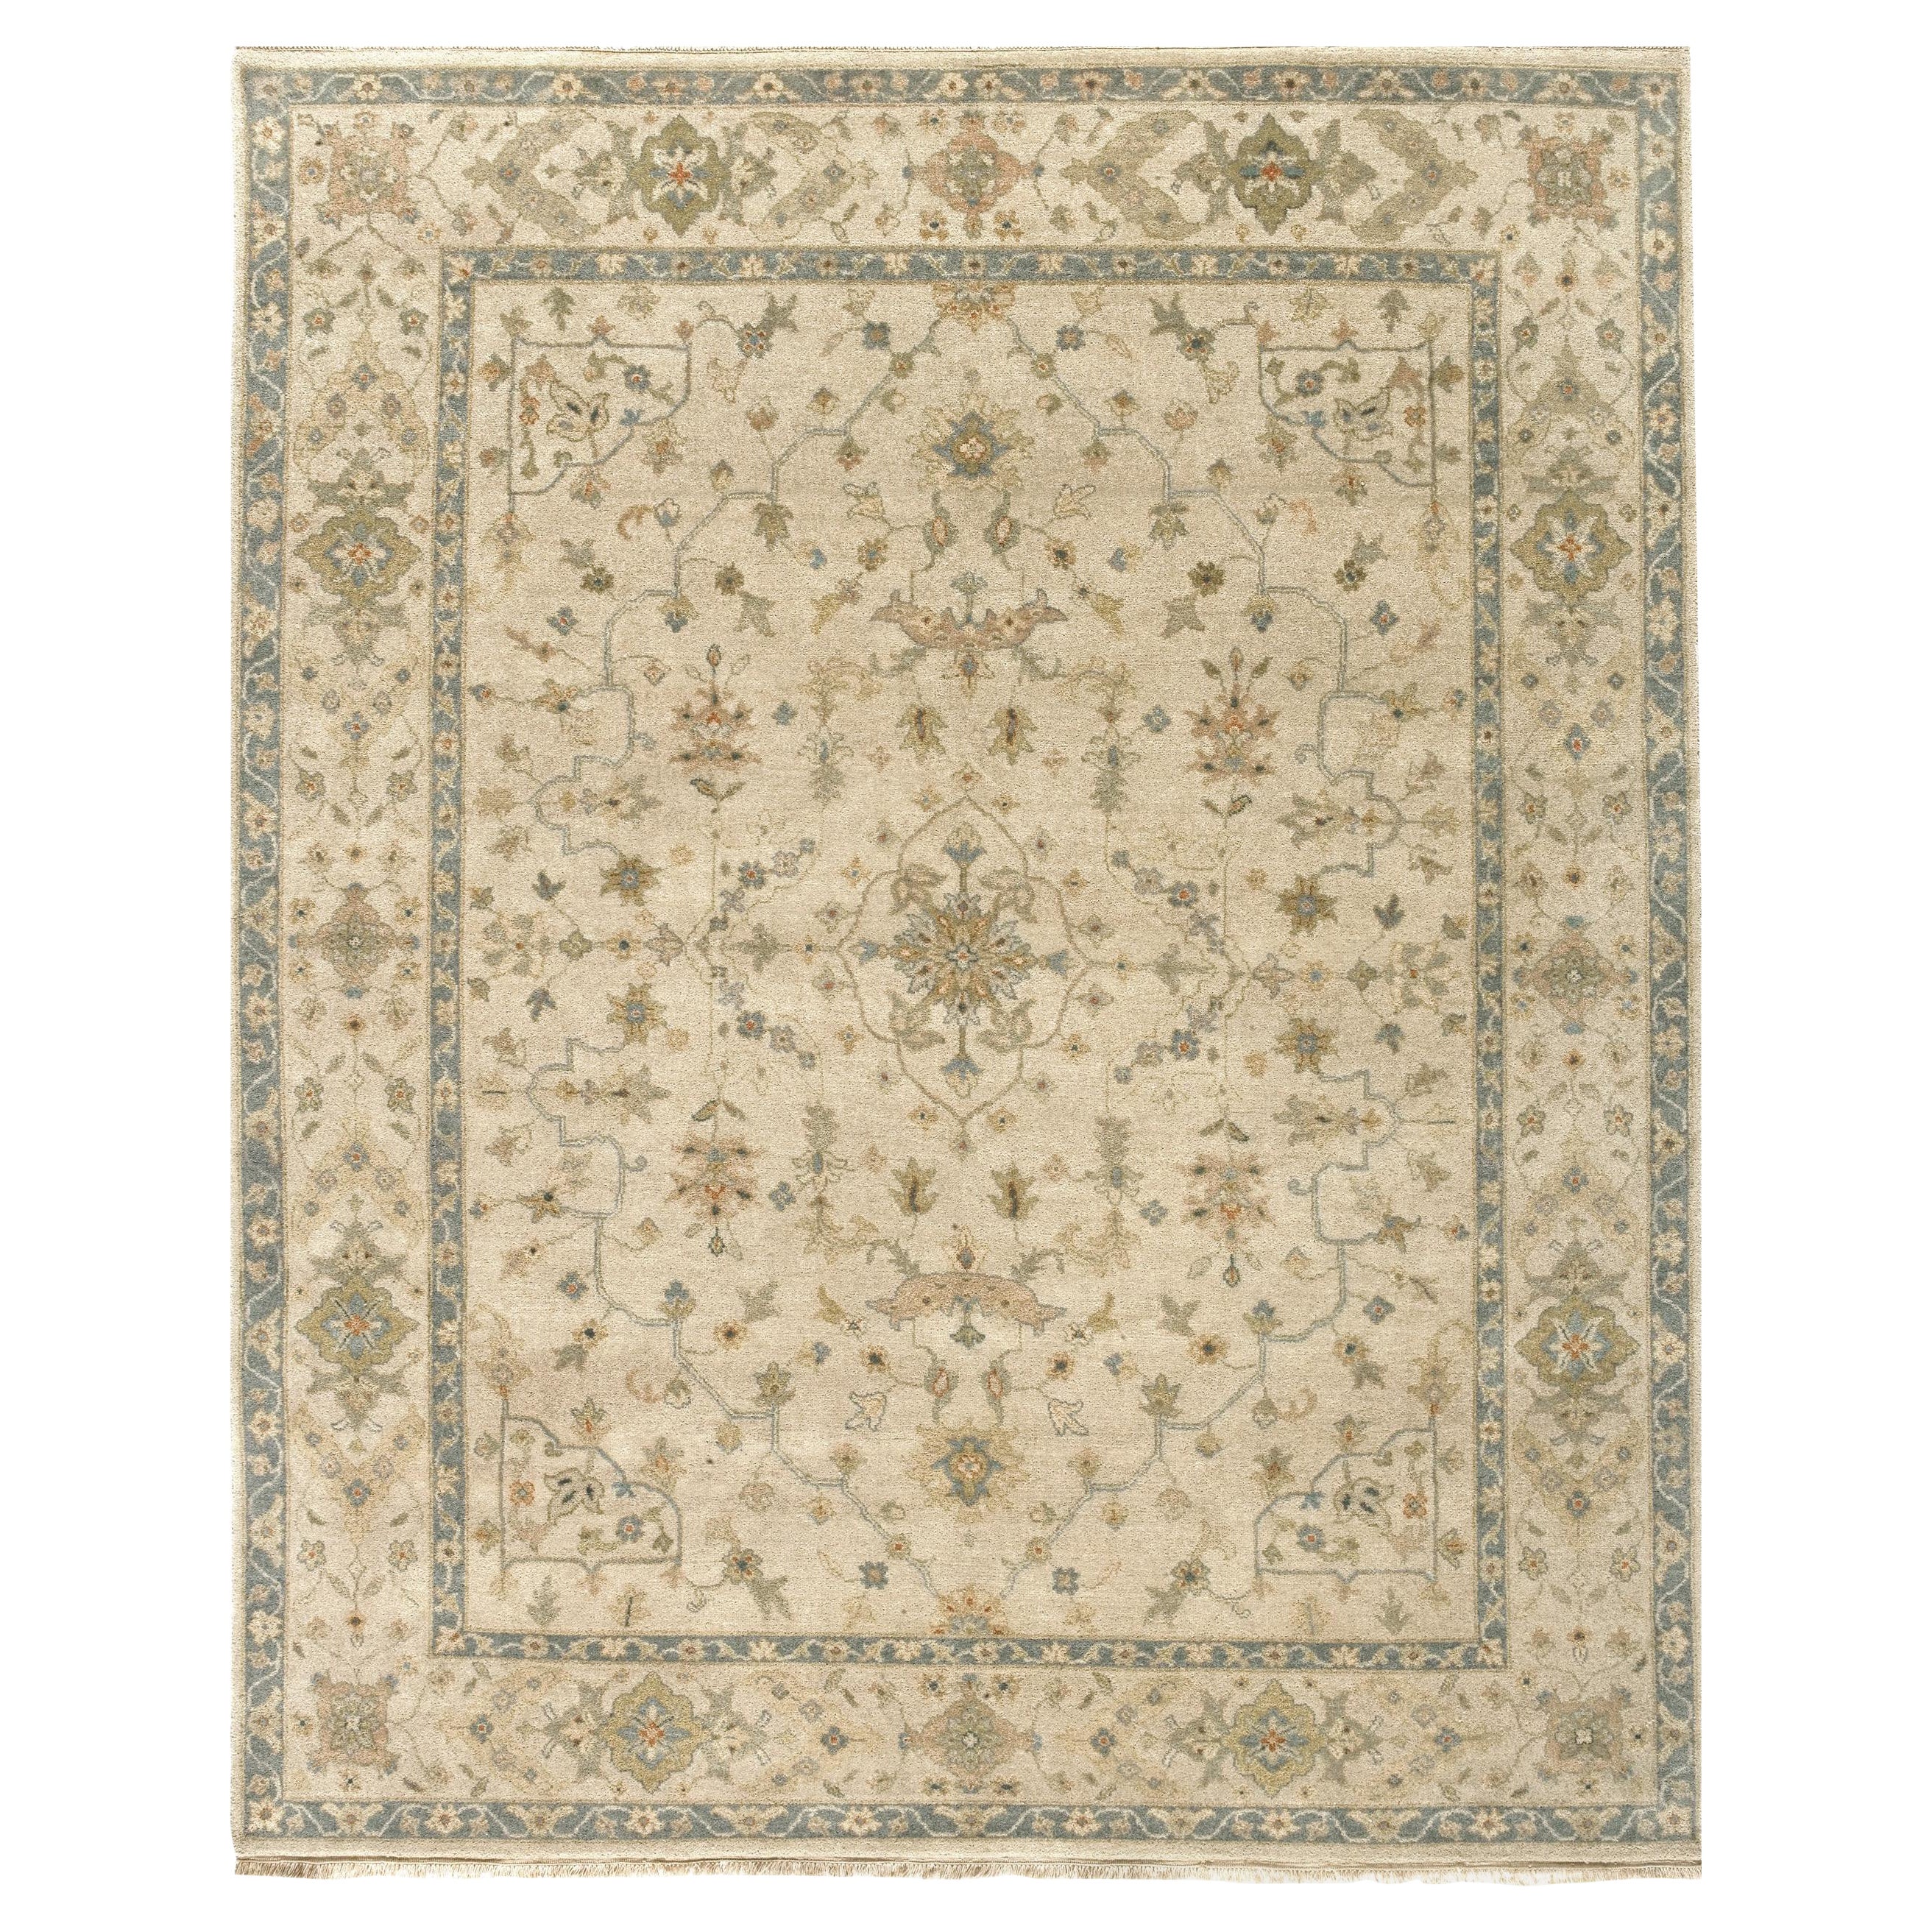 Luxury Traditional Hand-Knotted Herati Beige 12x22 Rug